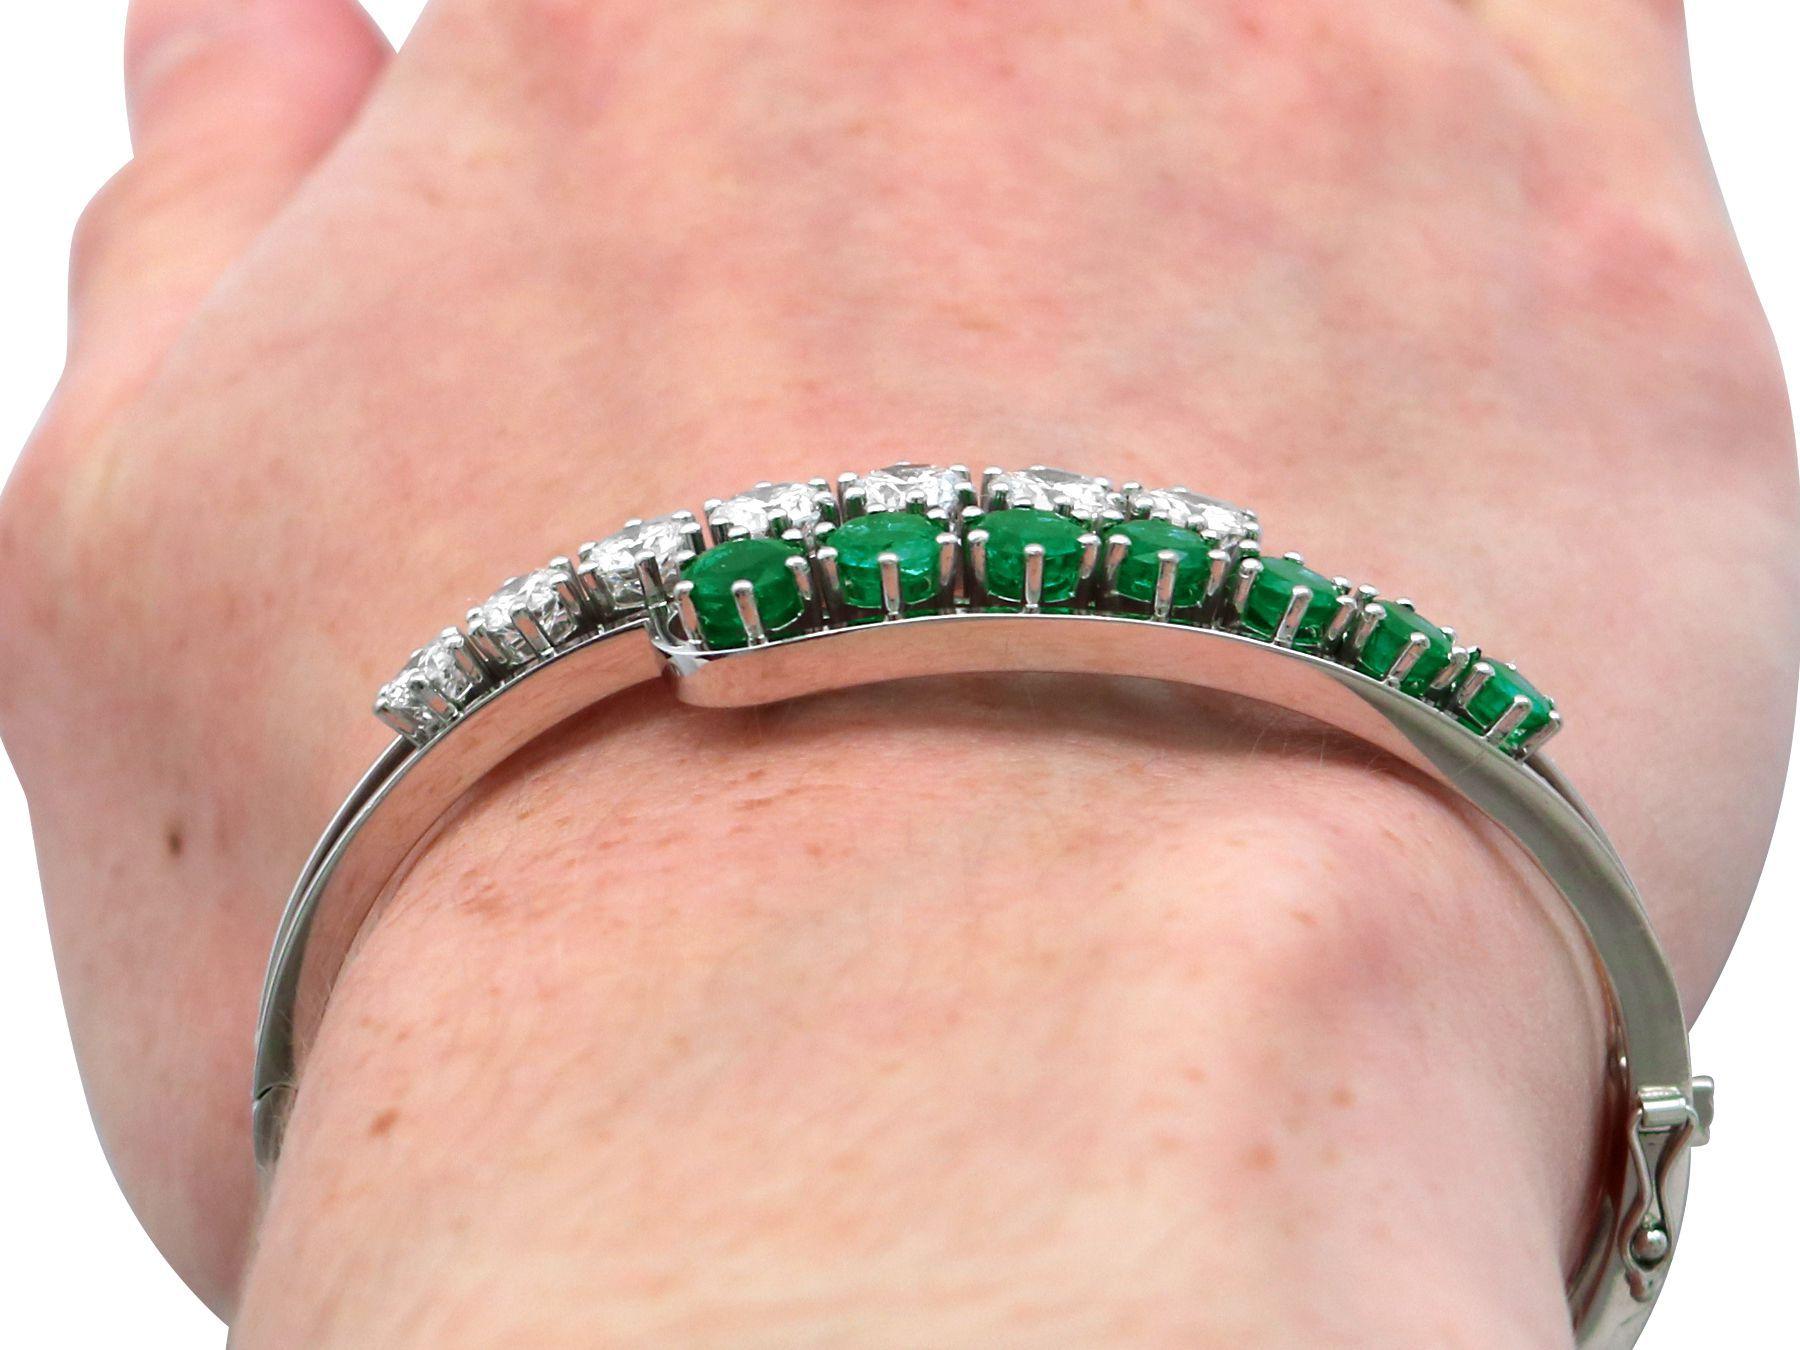 A stunning, fine and impressive vintage 3.20 carat emerald and 3.95 carat diamond 18 carat white gold bangle; part of our diverse vintage jewellery and estate jewelry collections

This stunning, fine and impressive vintage bangle has been crafted in